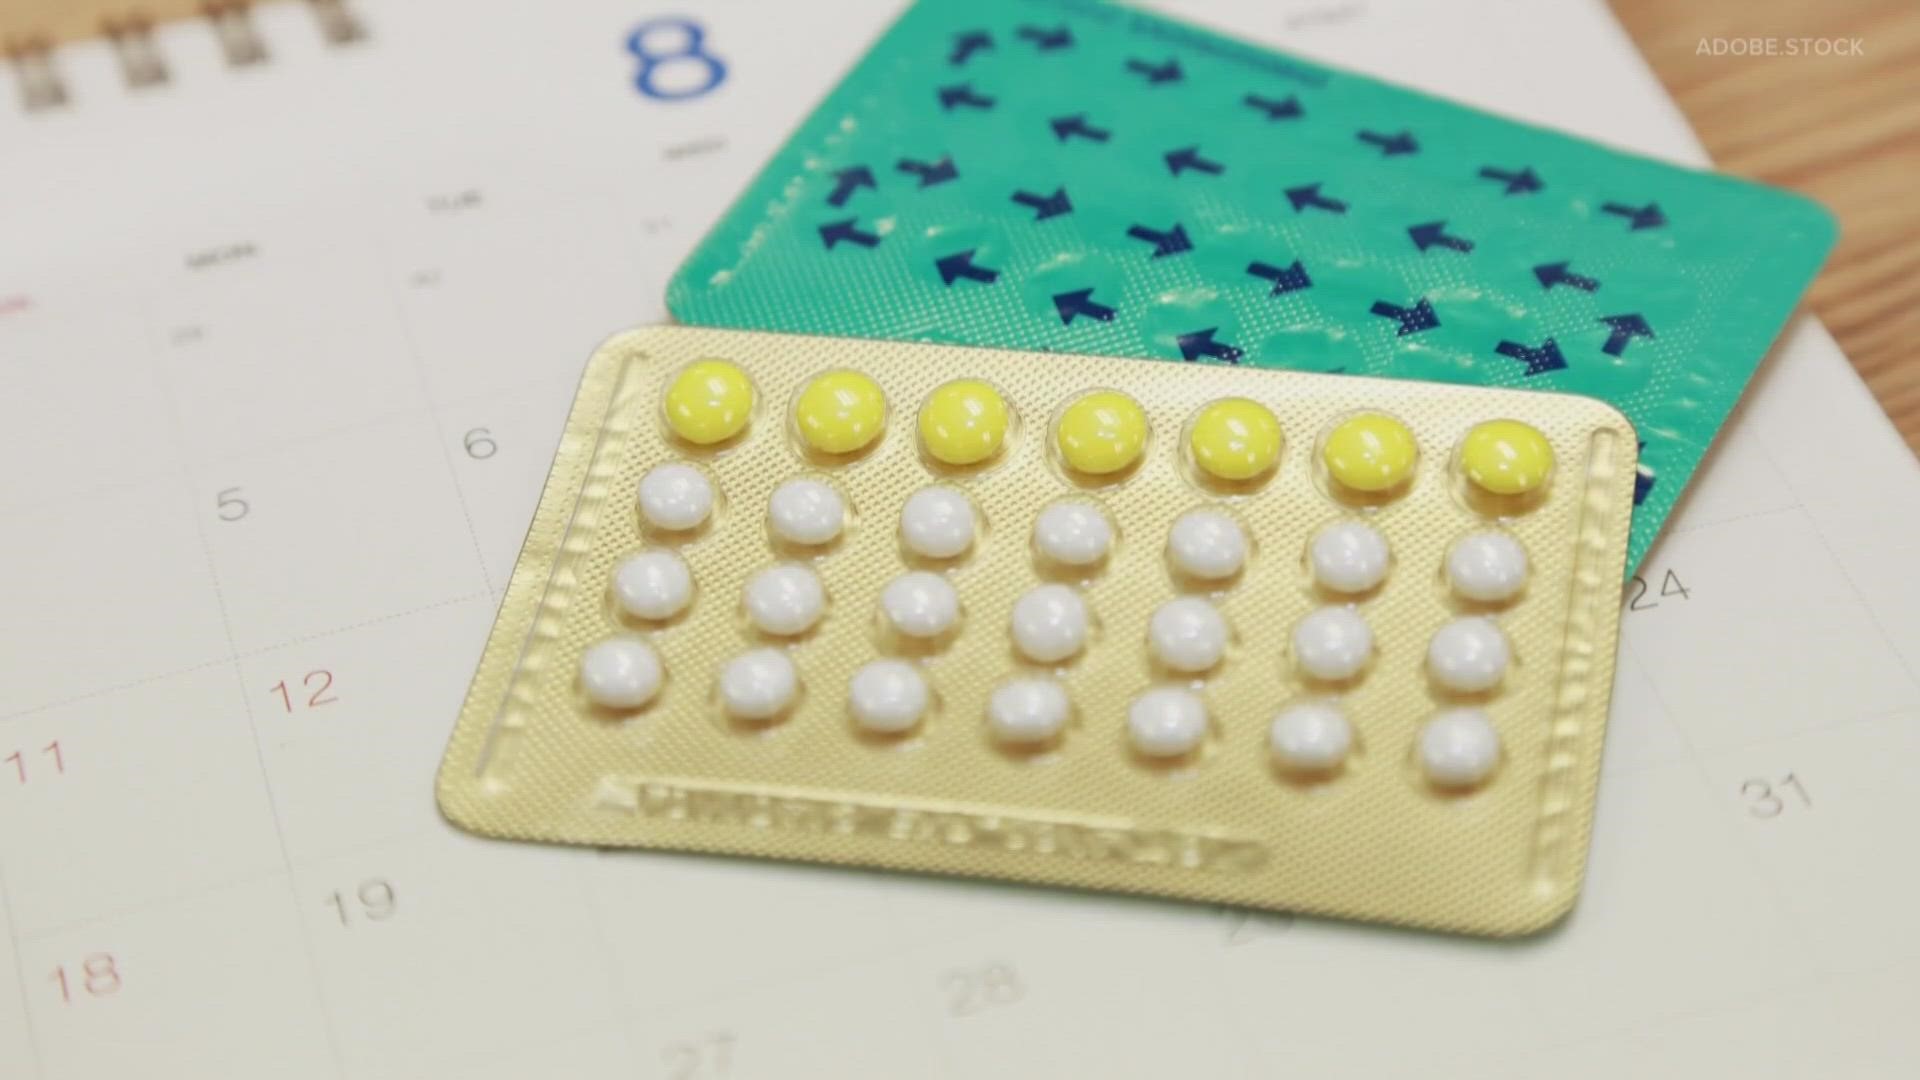 A bill being introduced would allow pharmacists to prescribe birth control.